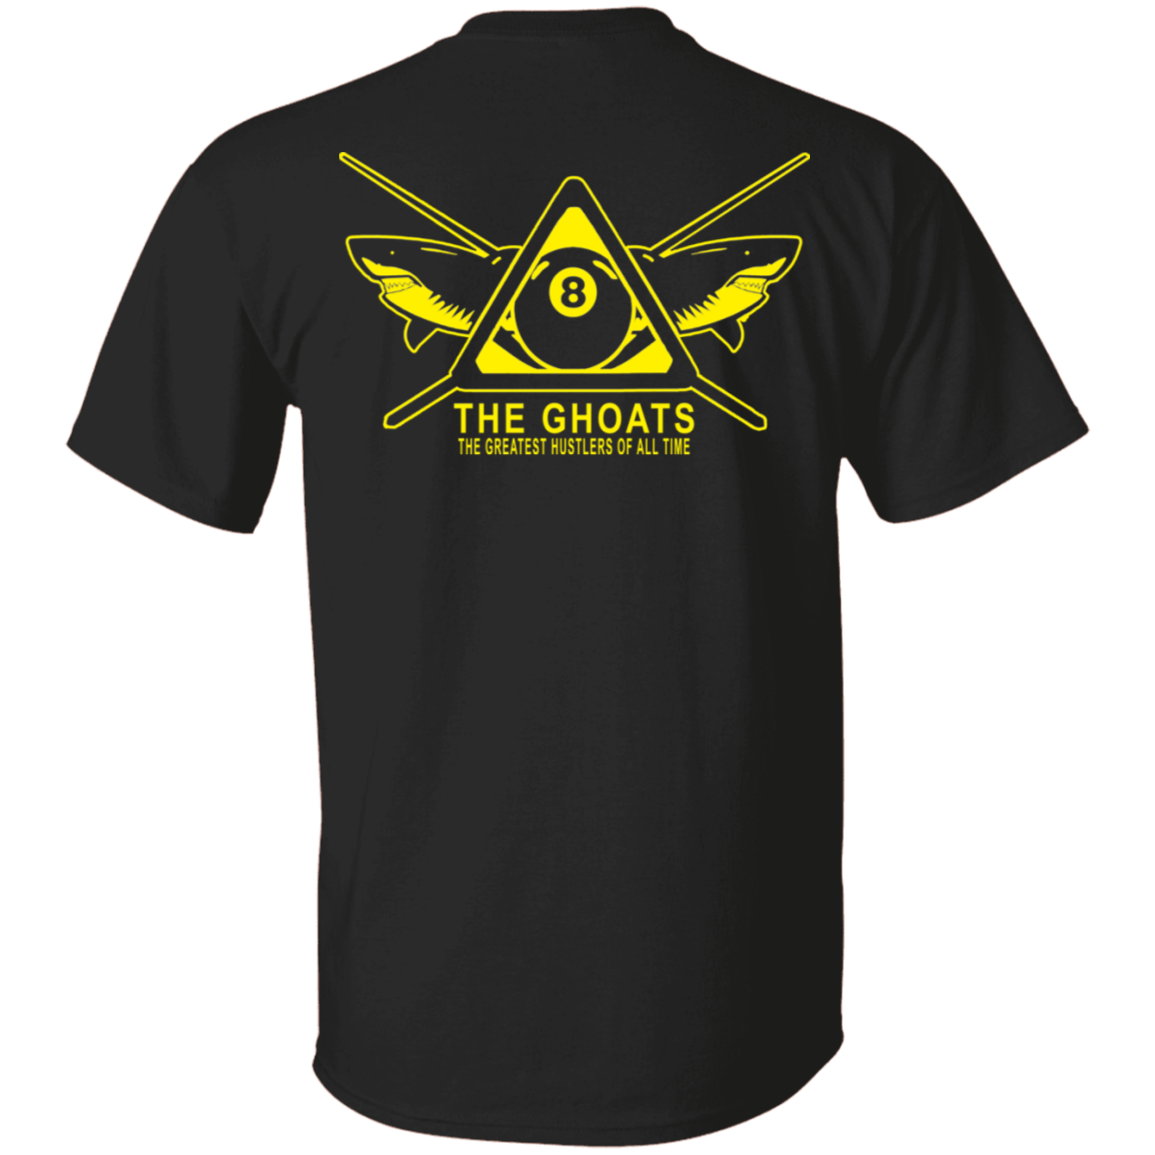 The GHOATS Custom Design #35. Beware of Sharks. Shoot at Your Own Risk. Basic 100% Cotton T-Shirt